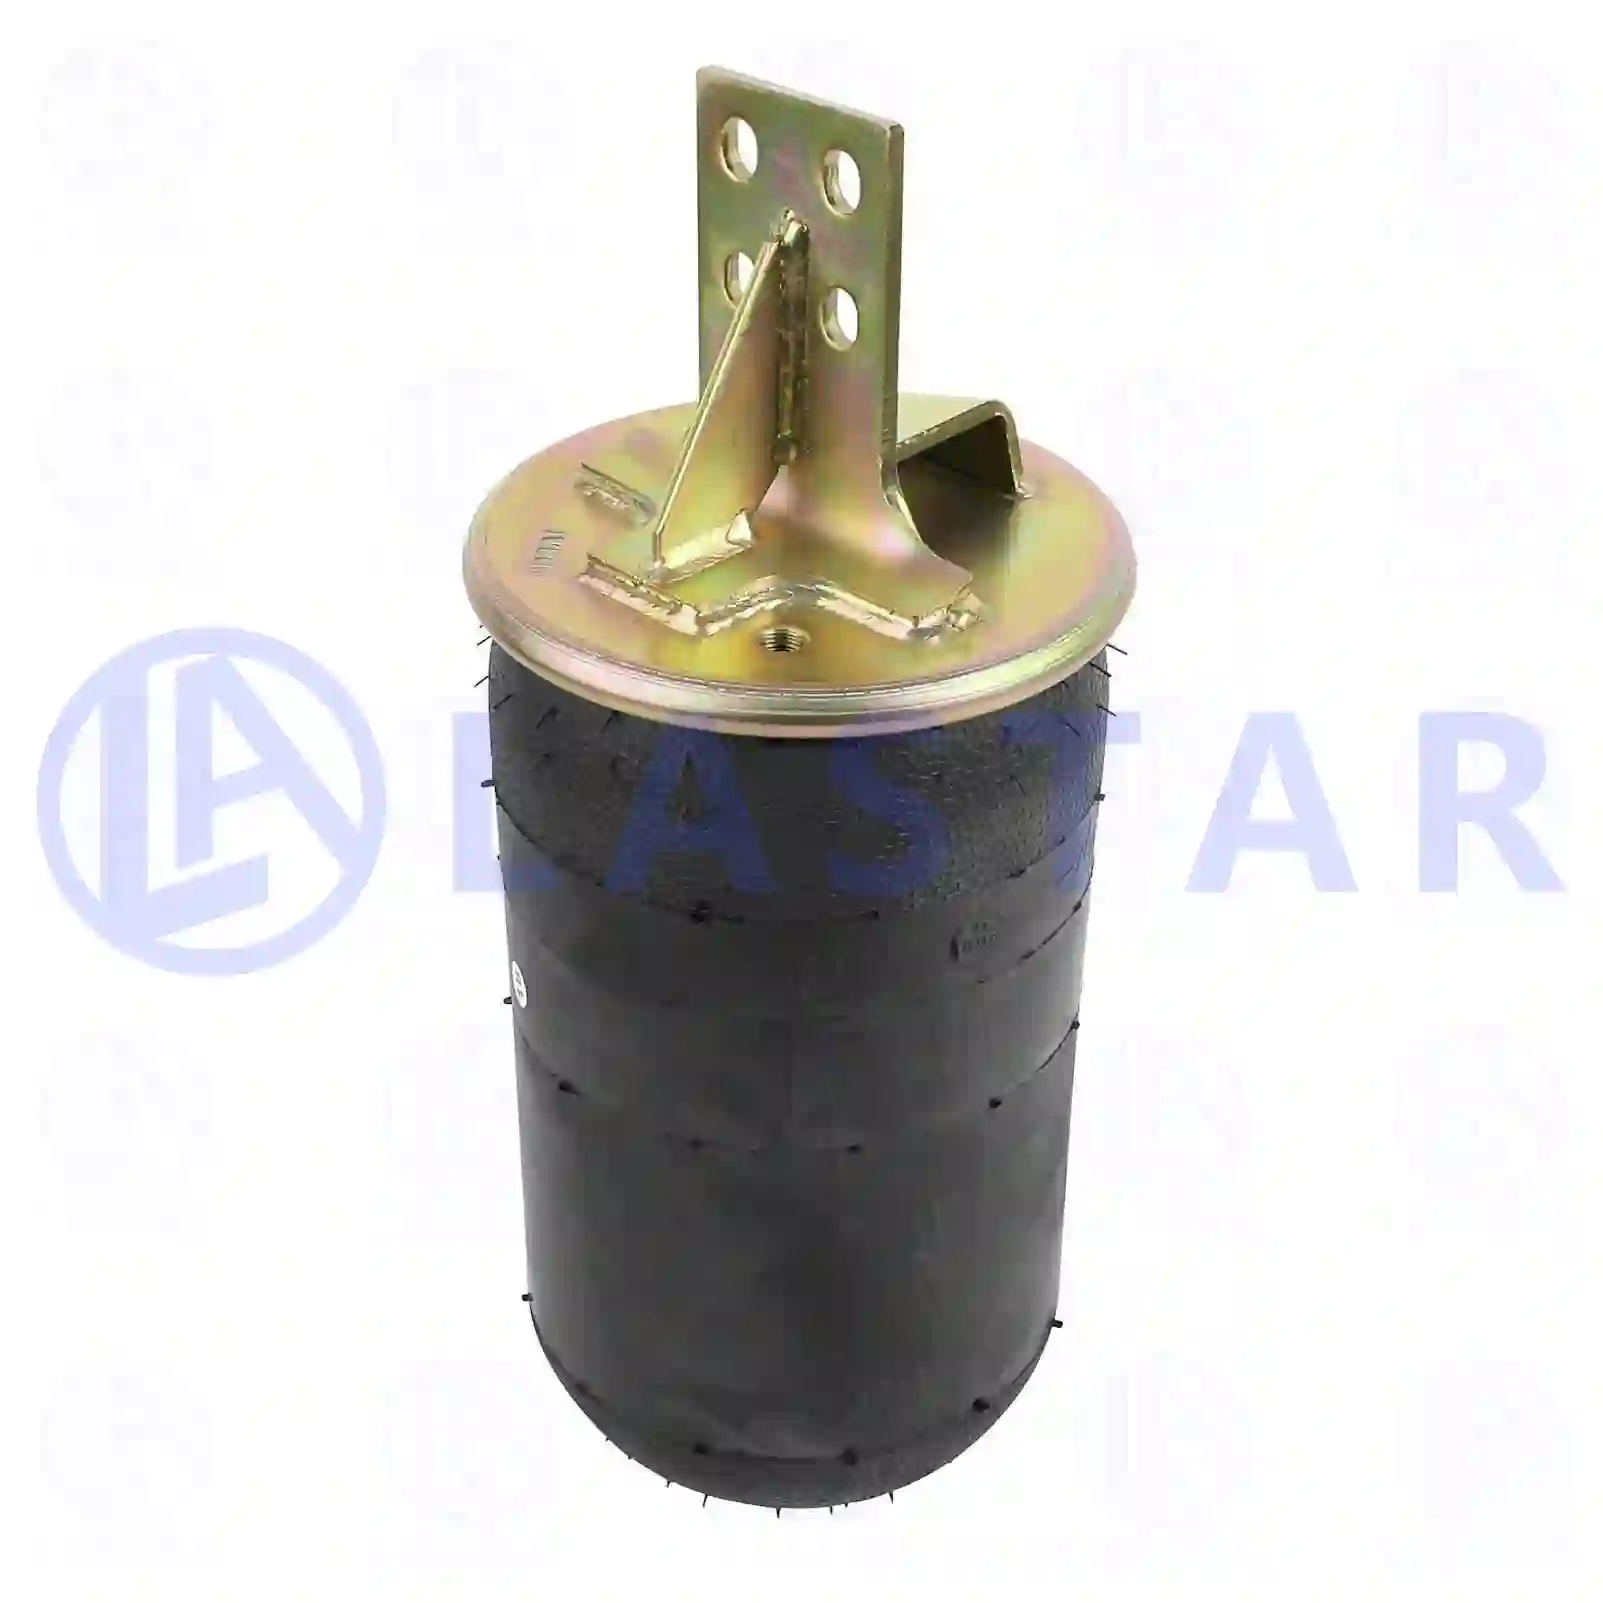 Air spring, without piston, 77729313, 42559768 ||  77729313 Lastar Spare Part | Truck Spare Parts, Auotomotive Spare Parts Air spring, without piston, 77729313, 42559768 ||  77729313 Lastar Spare Part | Truck Spare Parts, Auotomotive Spare Parts